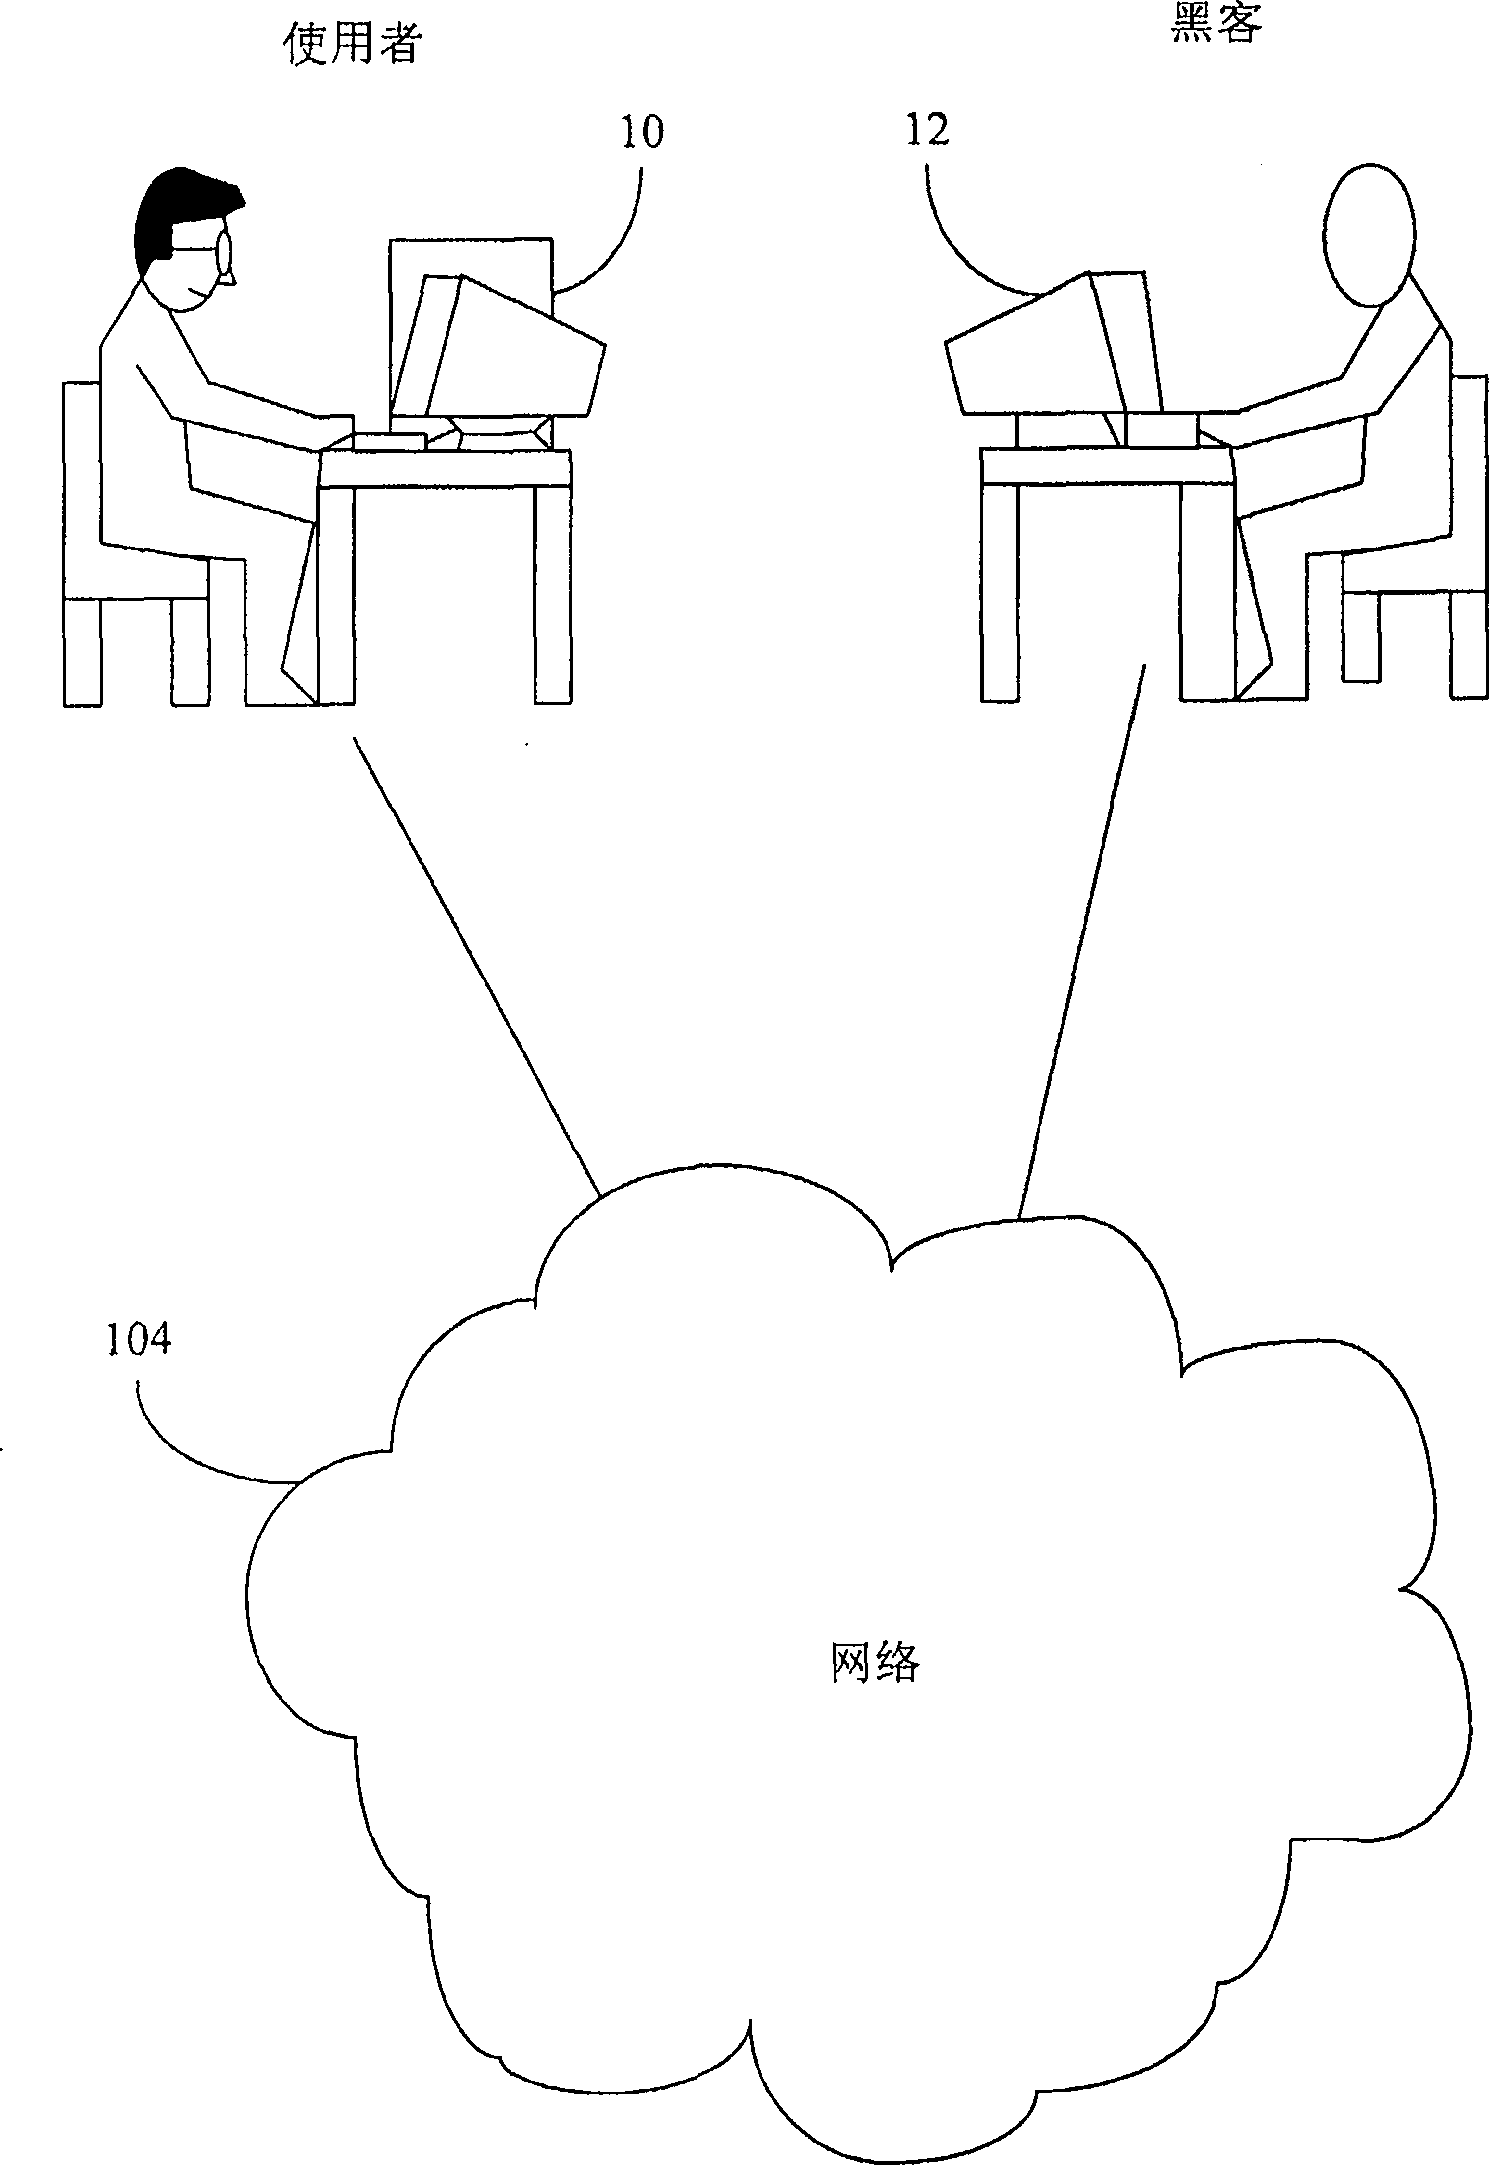 Method for protecting the computer data